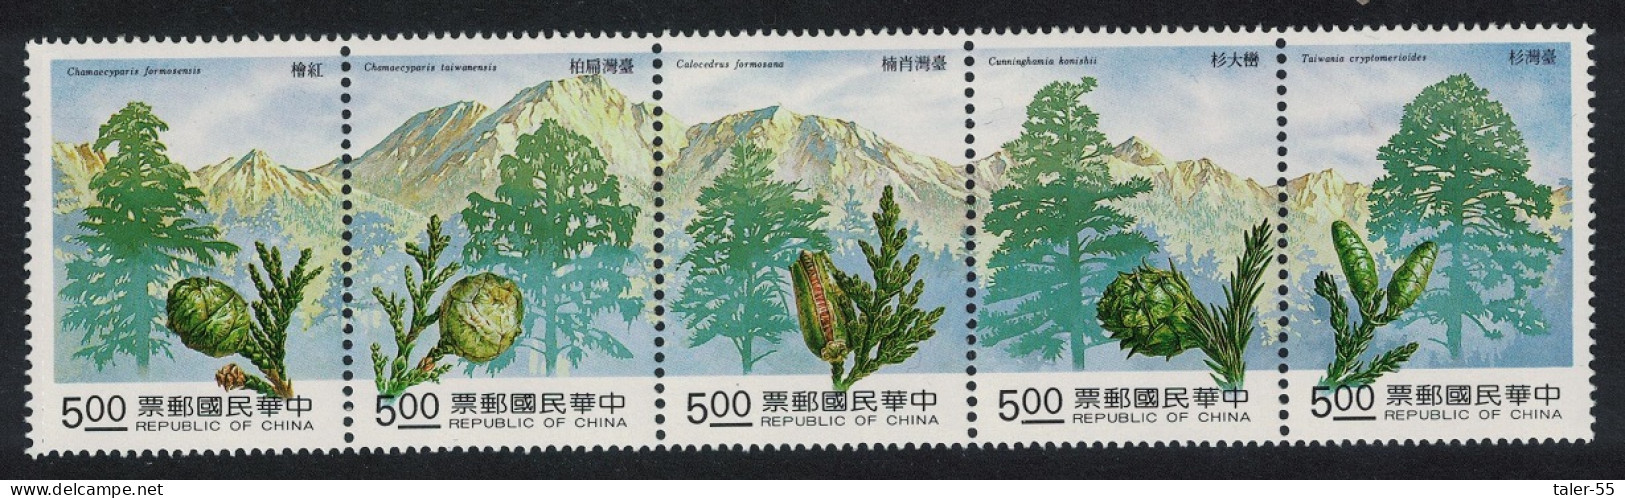 Taiwan Forest Resources Conifers 5v Strip 1992 MNH SG#2051-2055 - Neufs